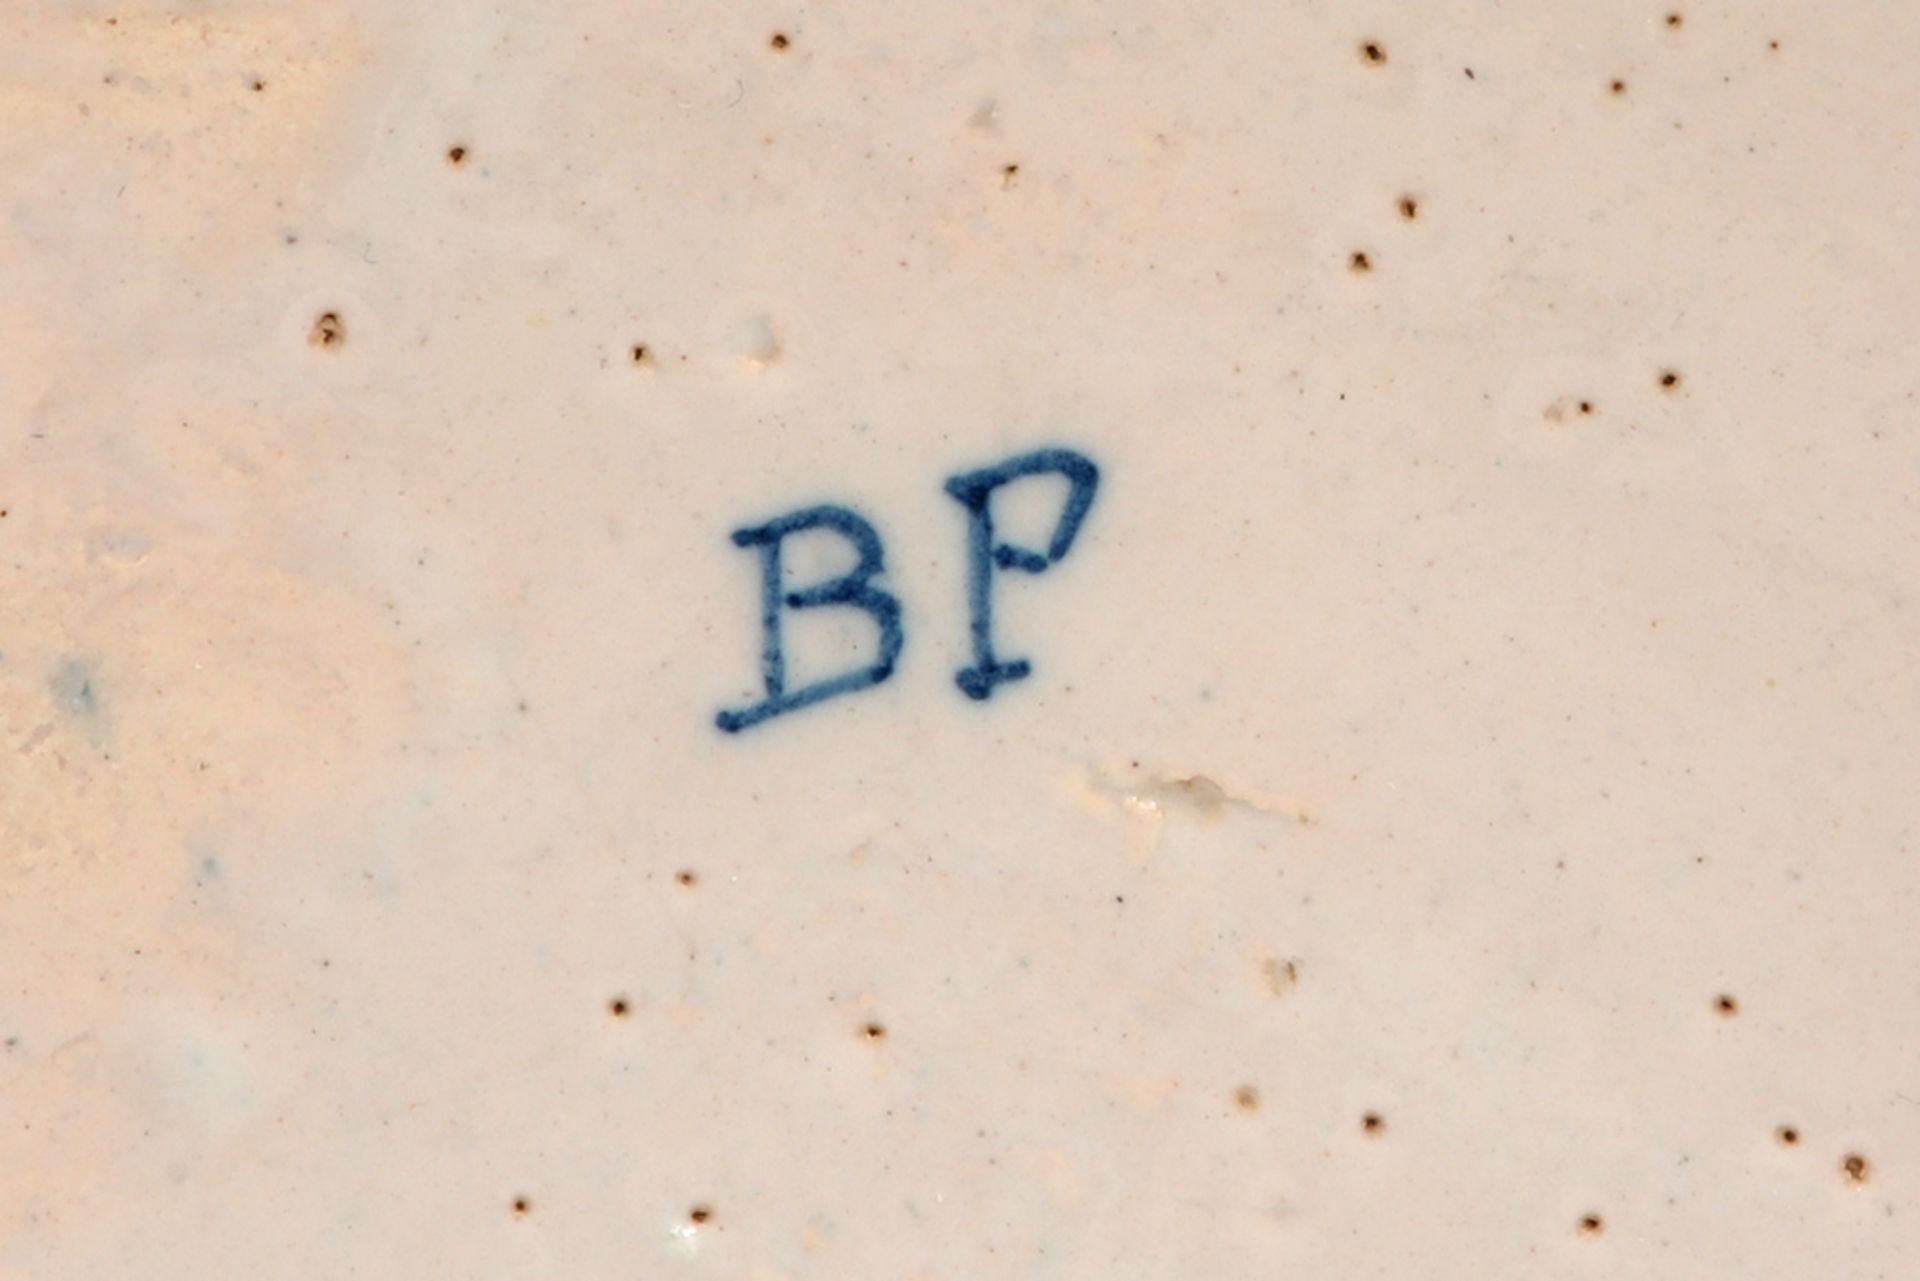 18th Cent. tobacco jar in ceramic from Delft, marked " BP ", with a blue-white "Burgamot" decor - - Image 5 of 5